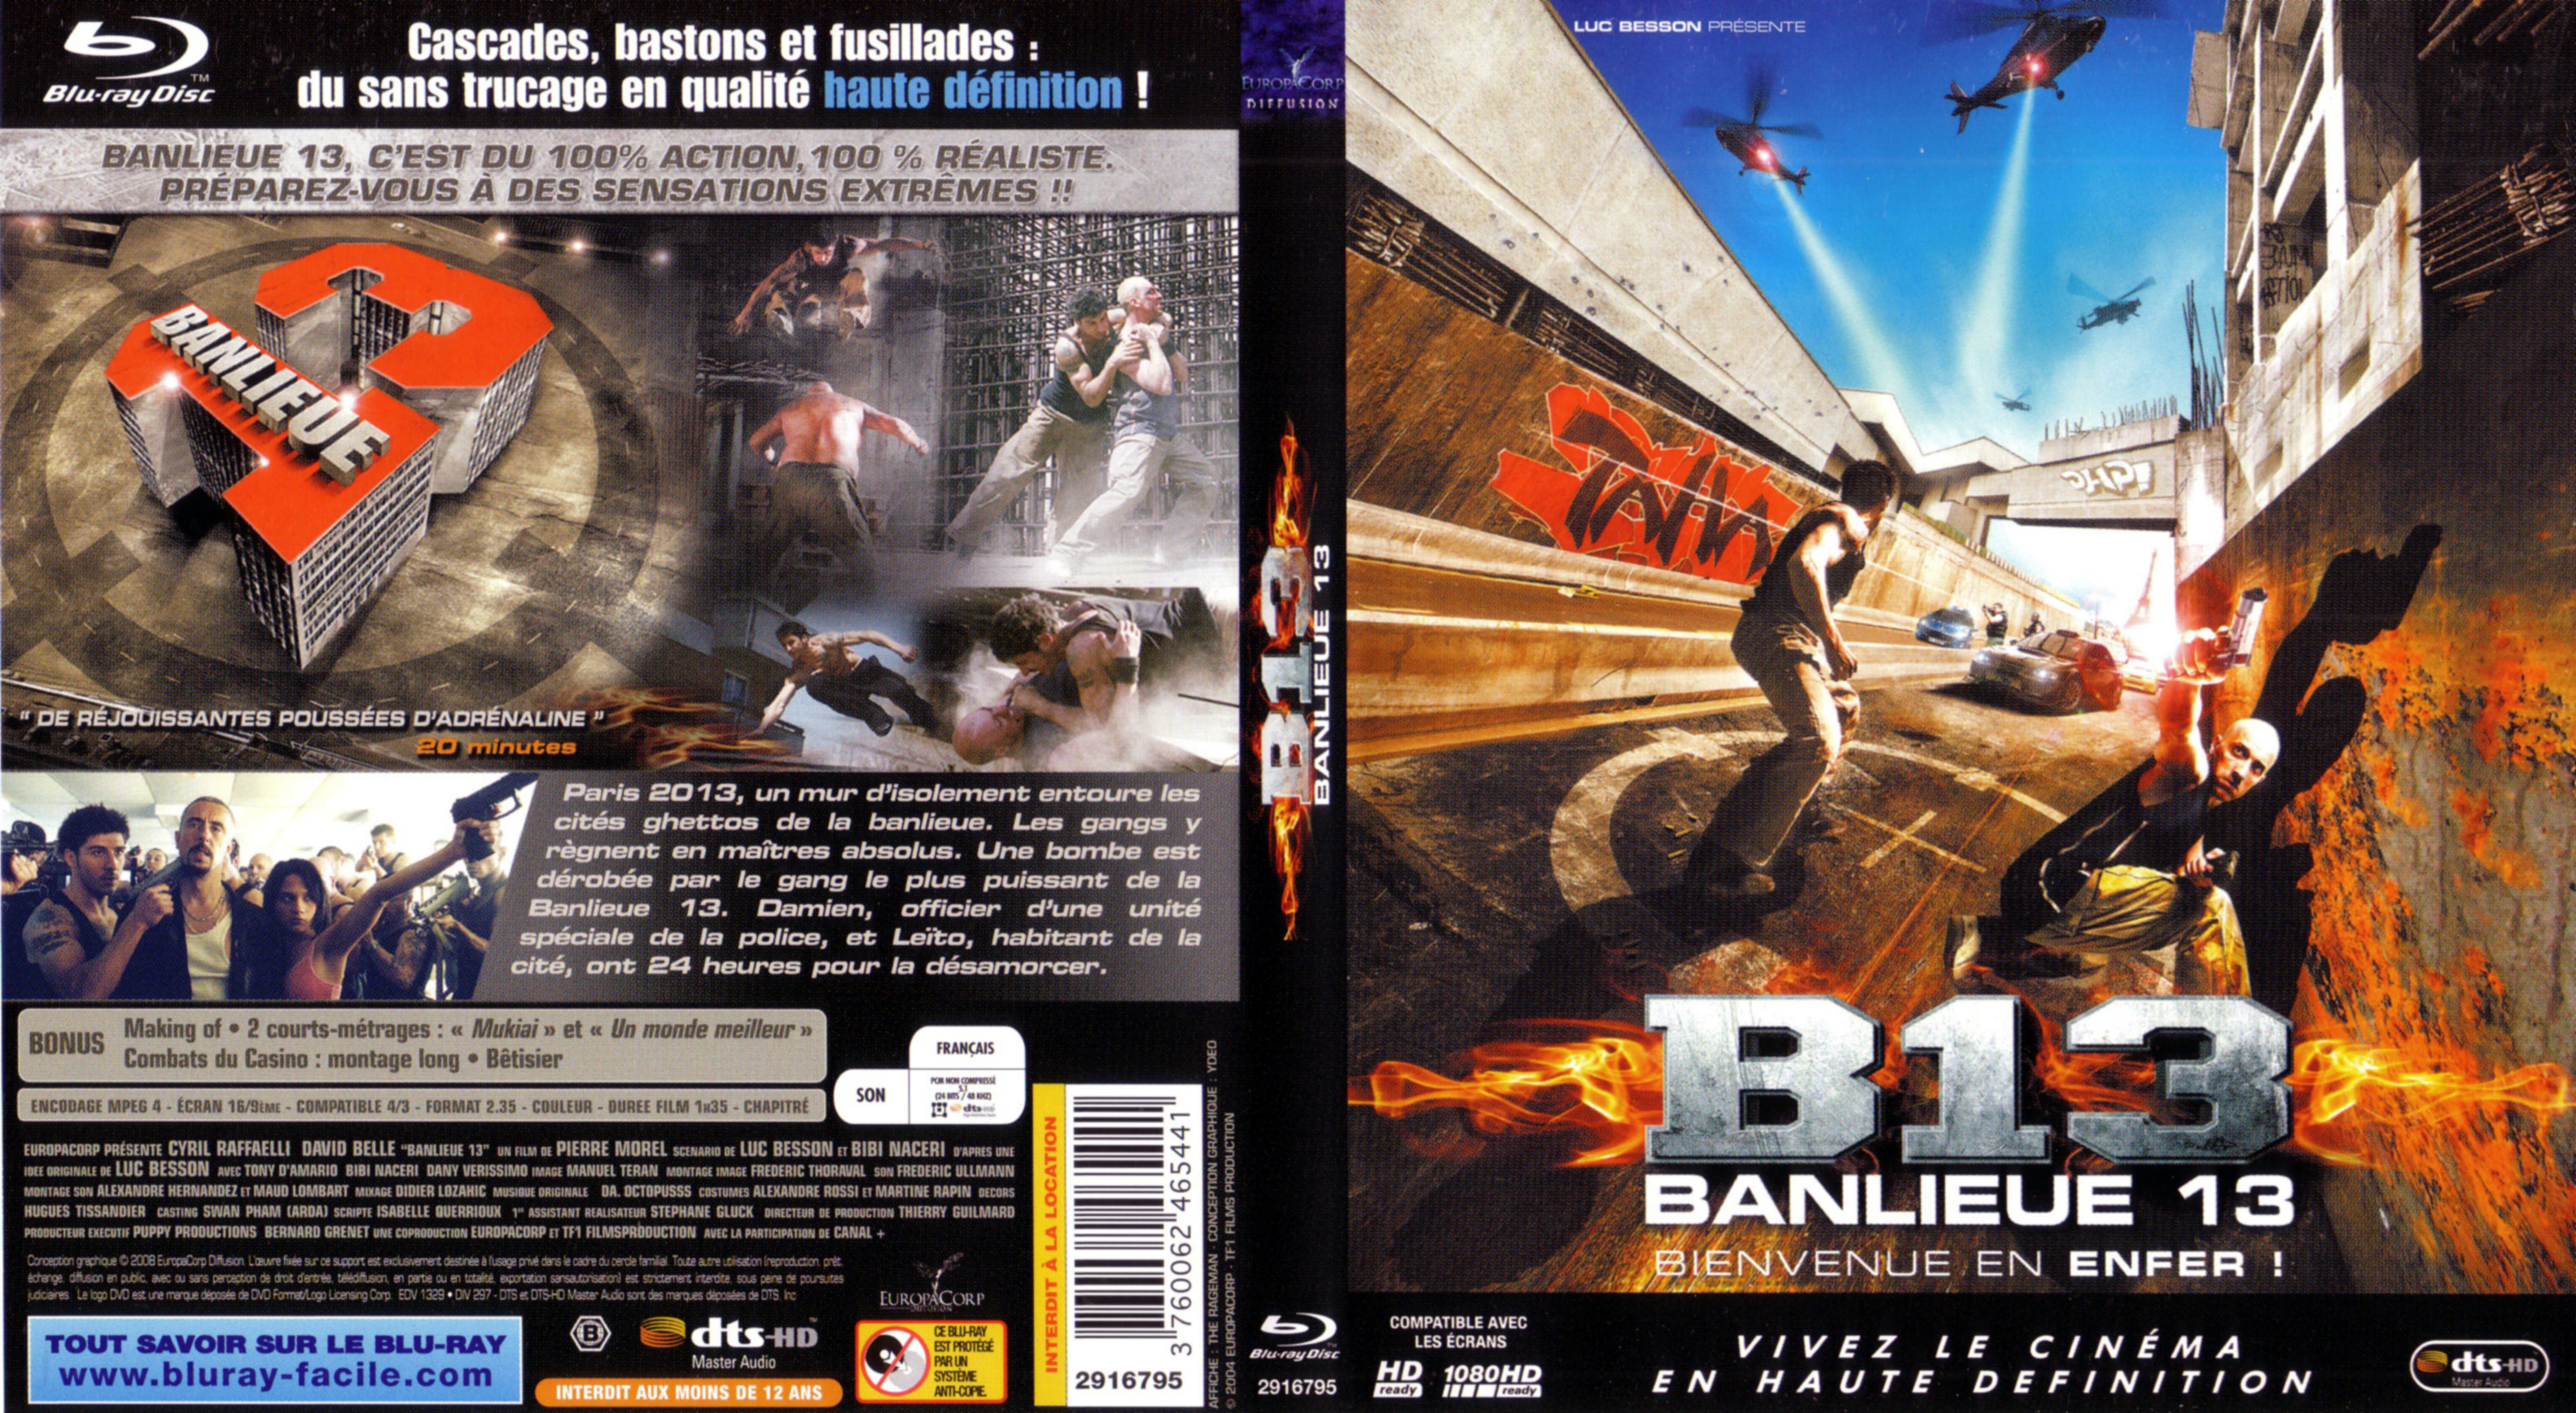 Jaquette DVD Banlieue 13 (BLU-RAY)